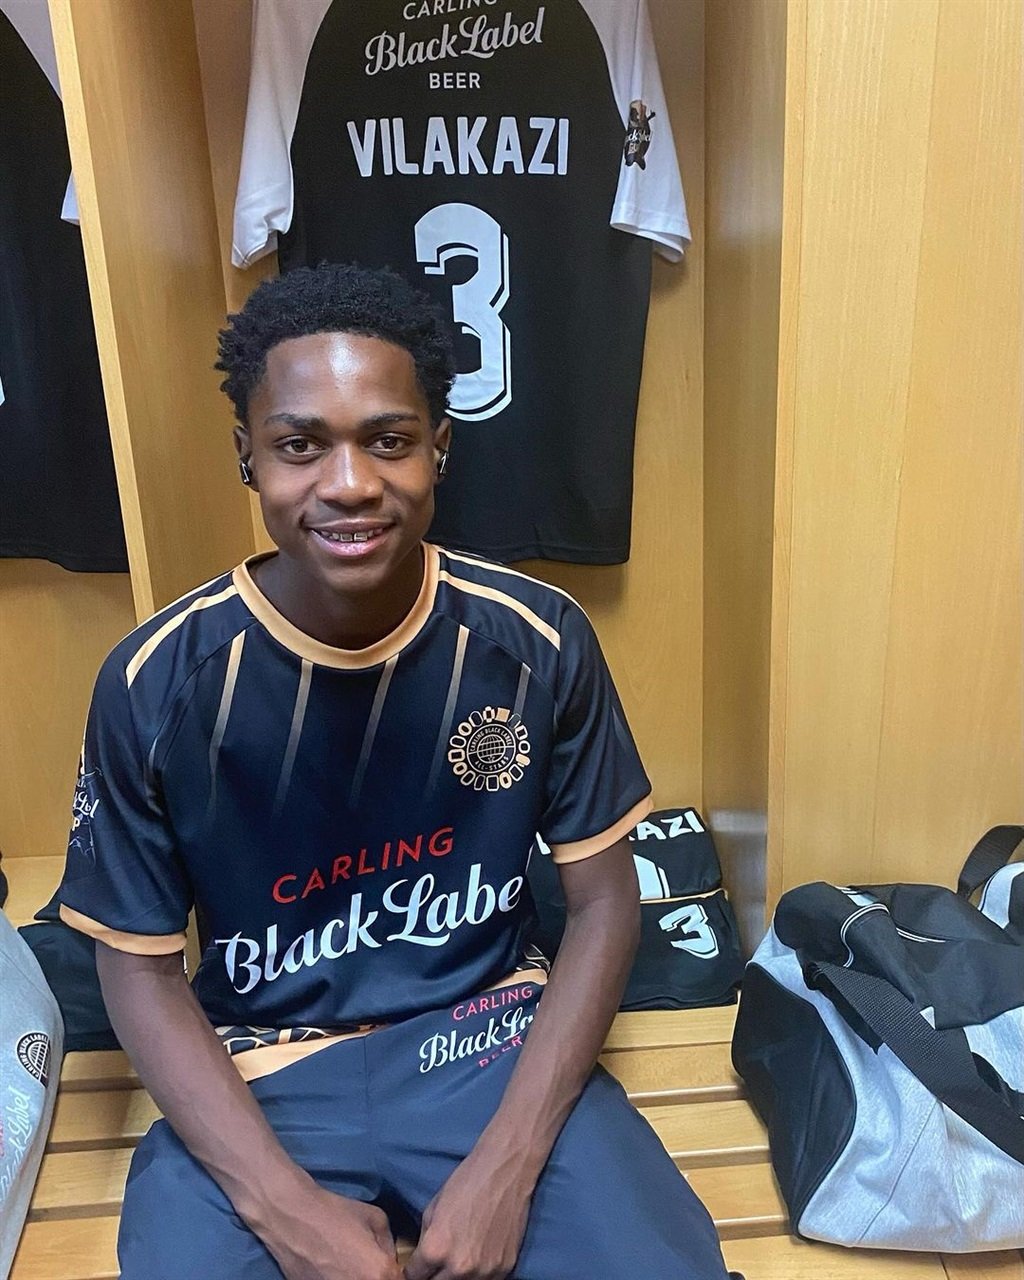 Kaizer Chiefs youngster Mfundo Vilakazi posted his experience with the Black Label All Star team on Saturday.